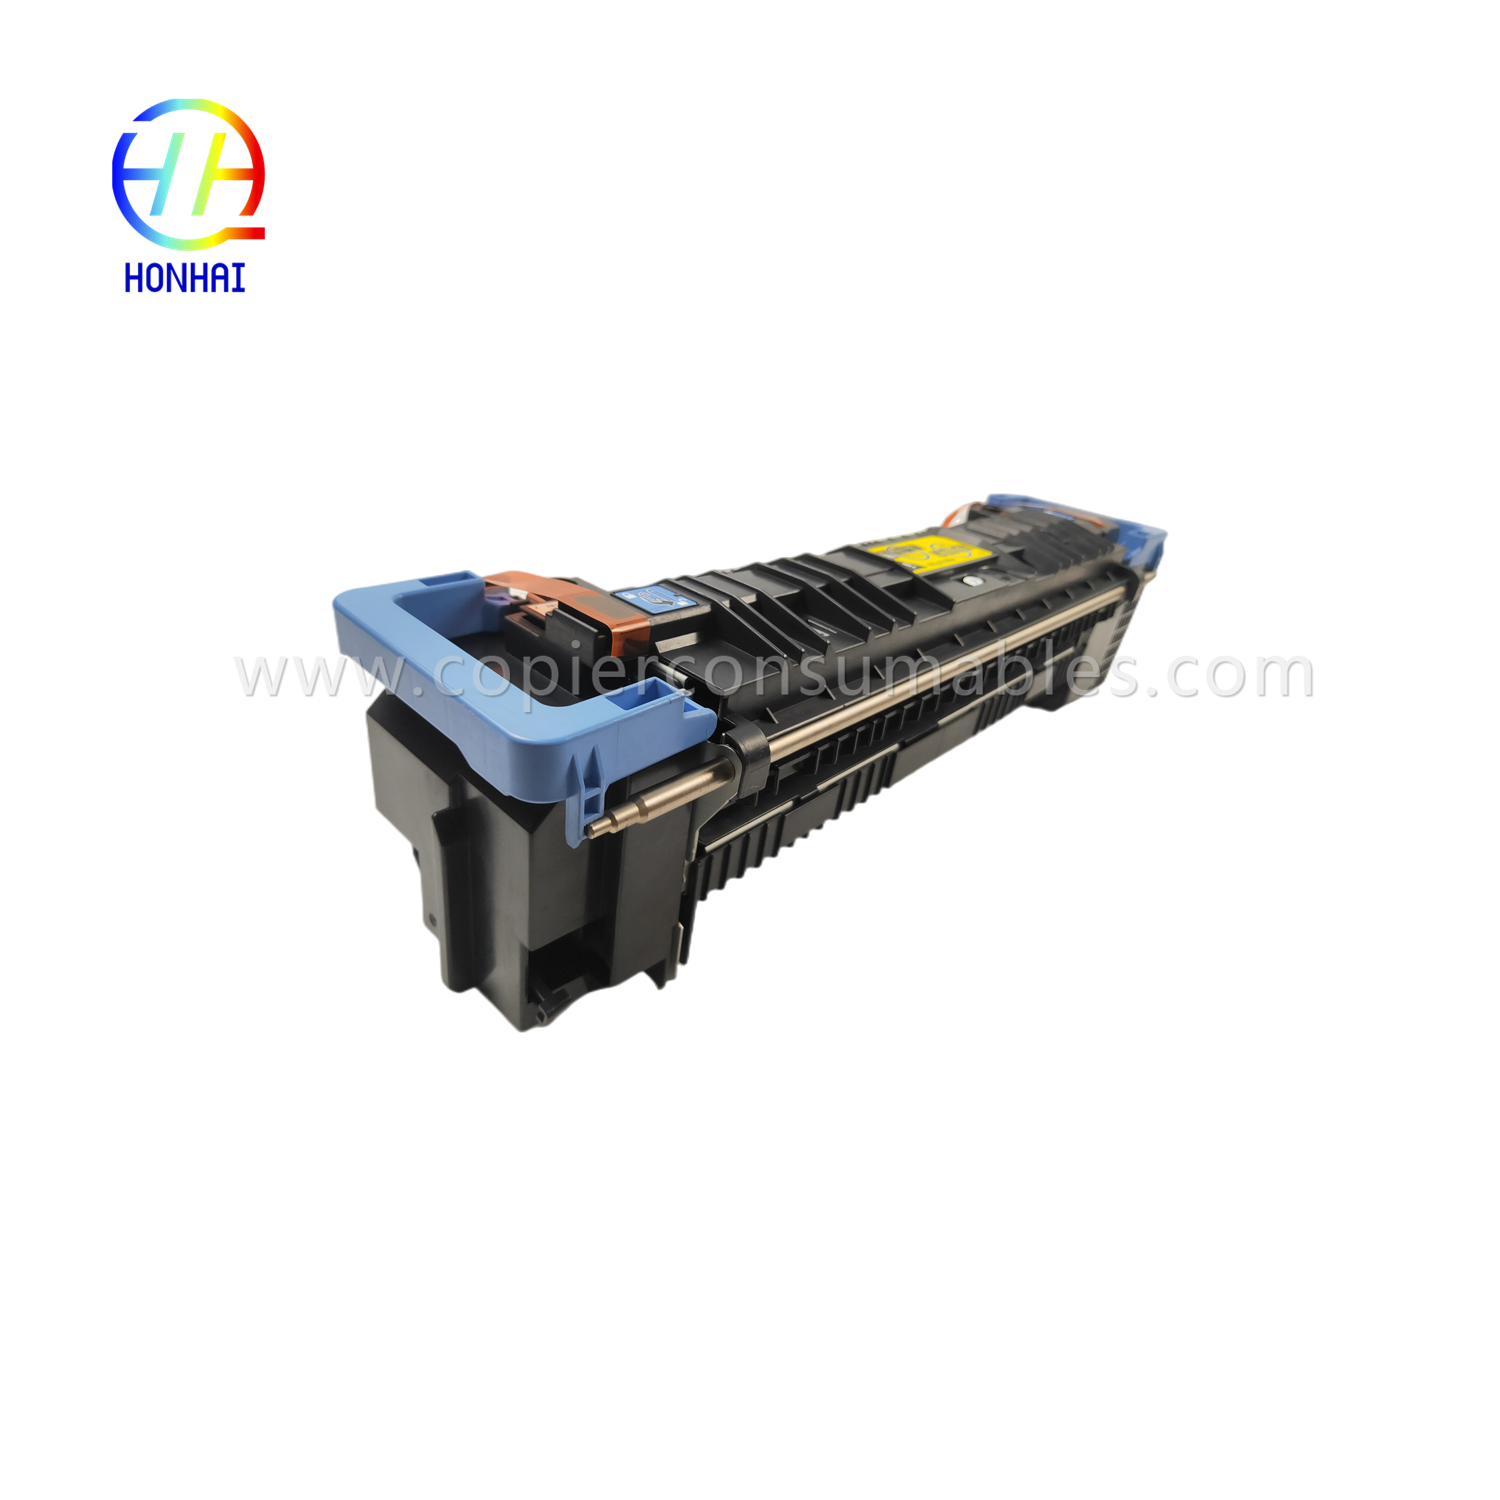 https://www.copierconsumables.com/fuser-assembly-unit-for-hp-m855-m880-m855dn-m855xh-m880z-m880z-c1n54-67901-c1n58-67901-fusing-heating-fixing-assy-product/